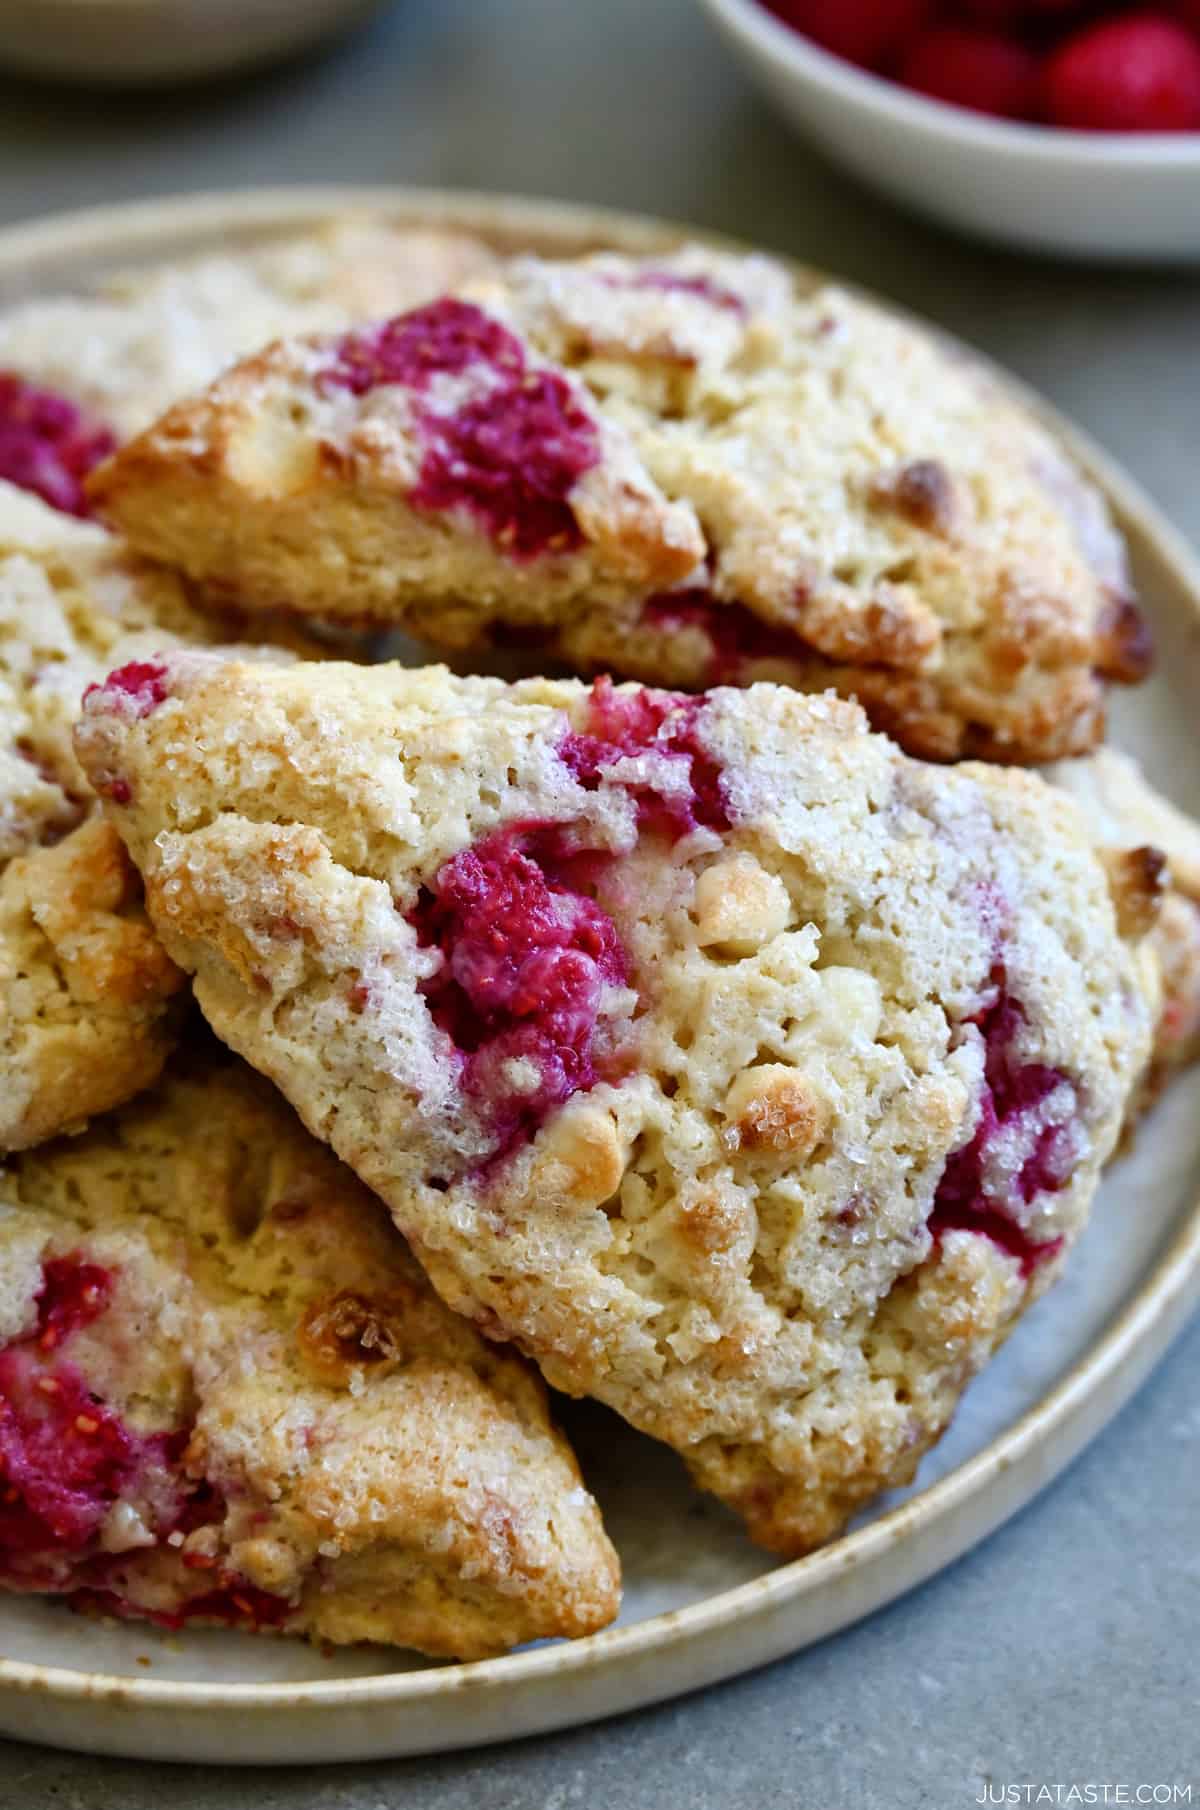 Raspberry scones studded with white chocolate chips on a plate.